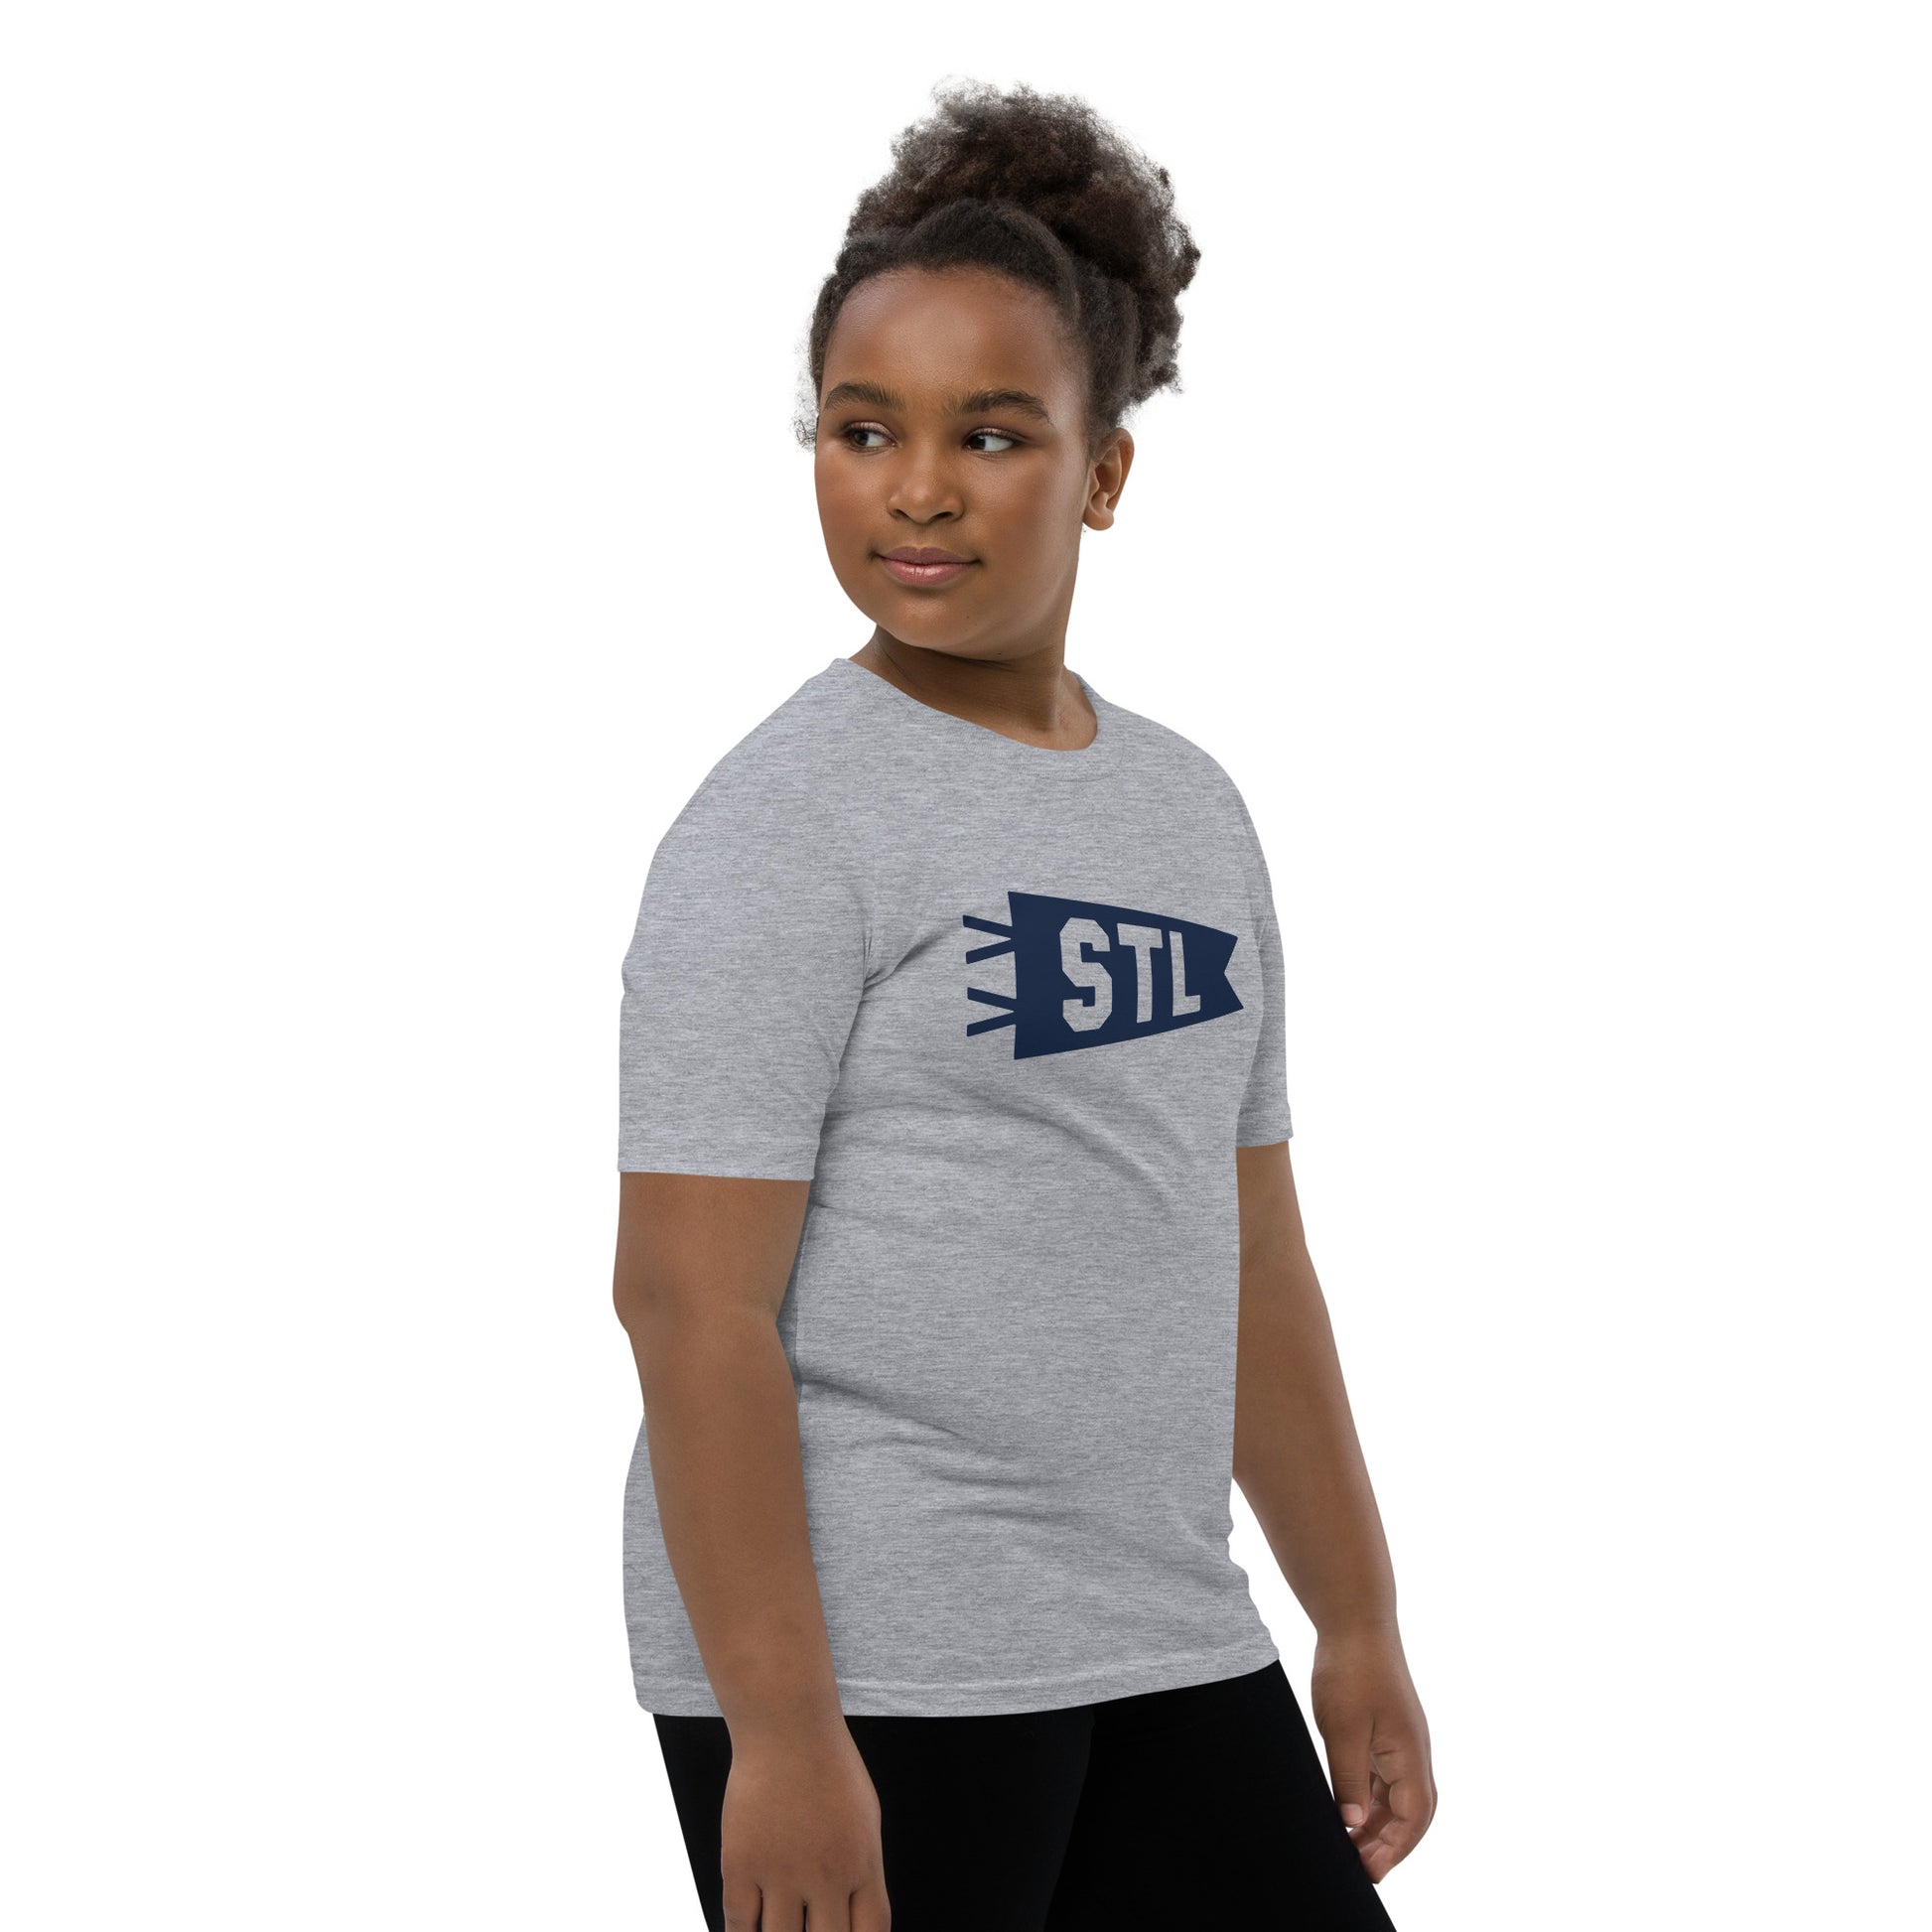 Kid's Airport Code Tee - Navy Blue Graphic • STL St. Louis • YHM Designs - Image 03